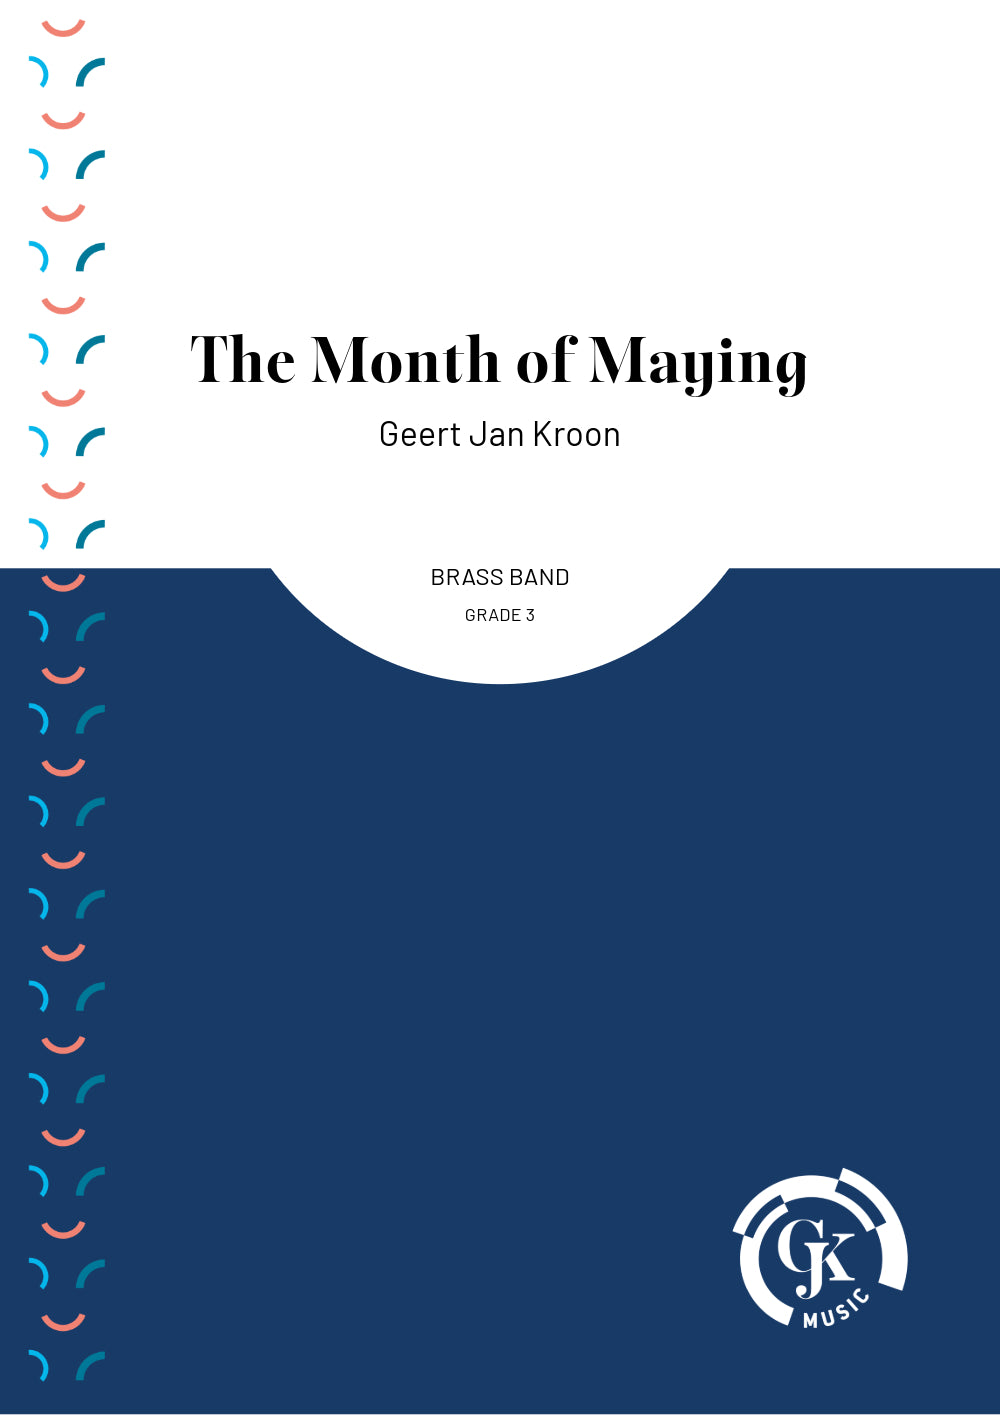 The Month of Maying - Brass Band